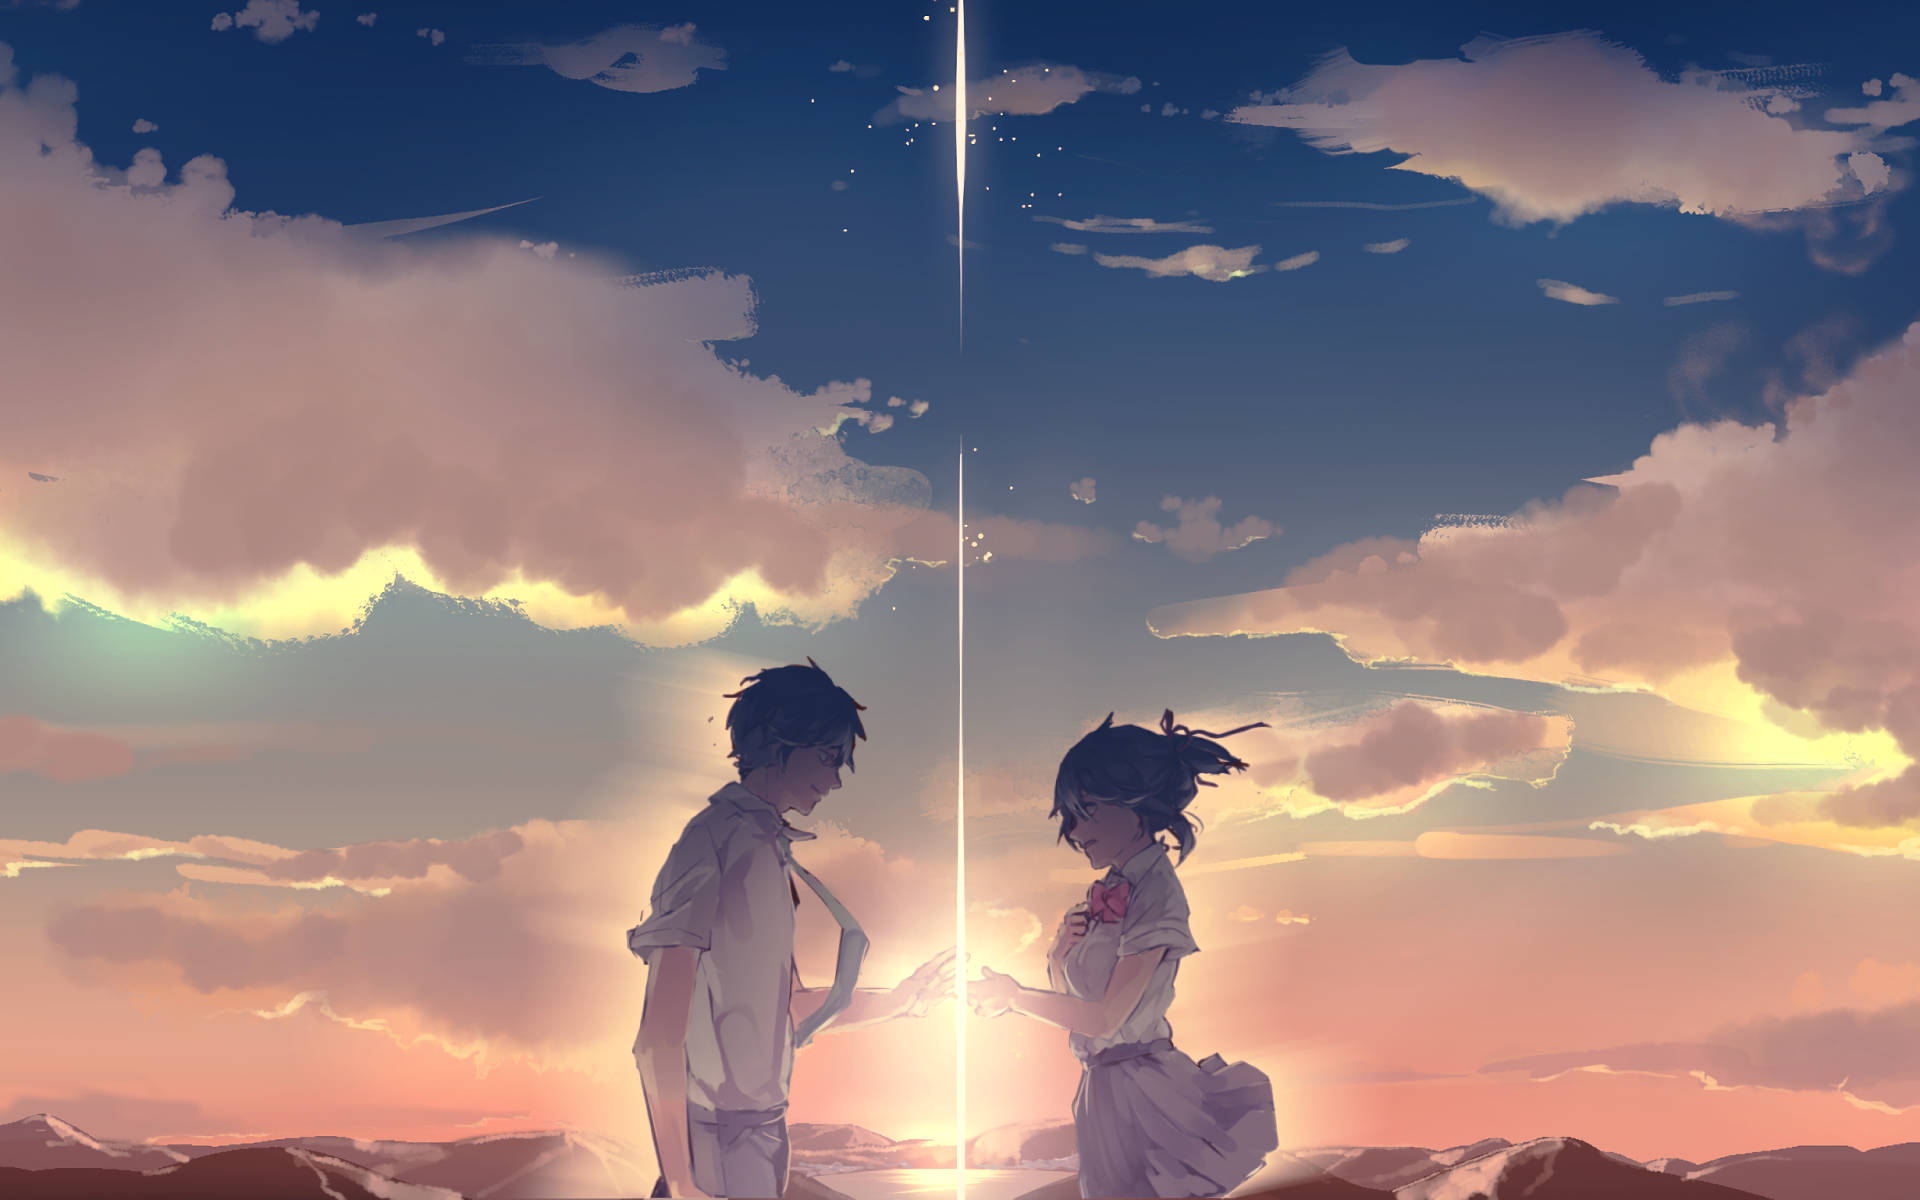 Your Name Anime Aesthetic Sunset